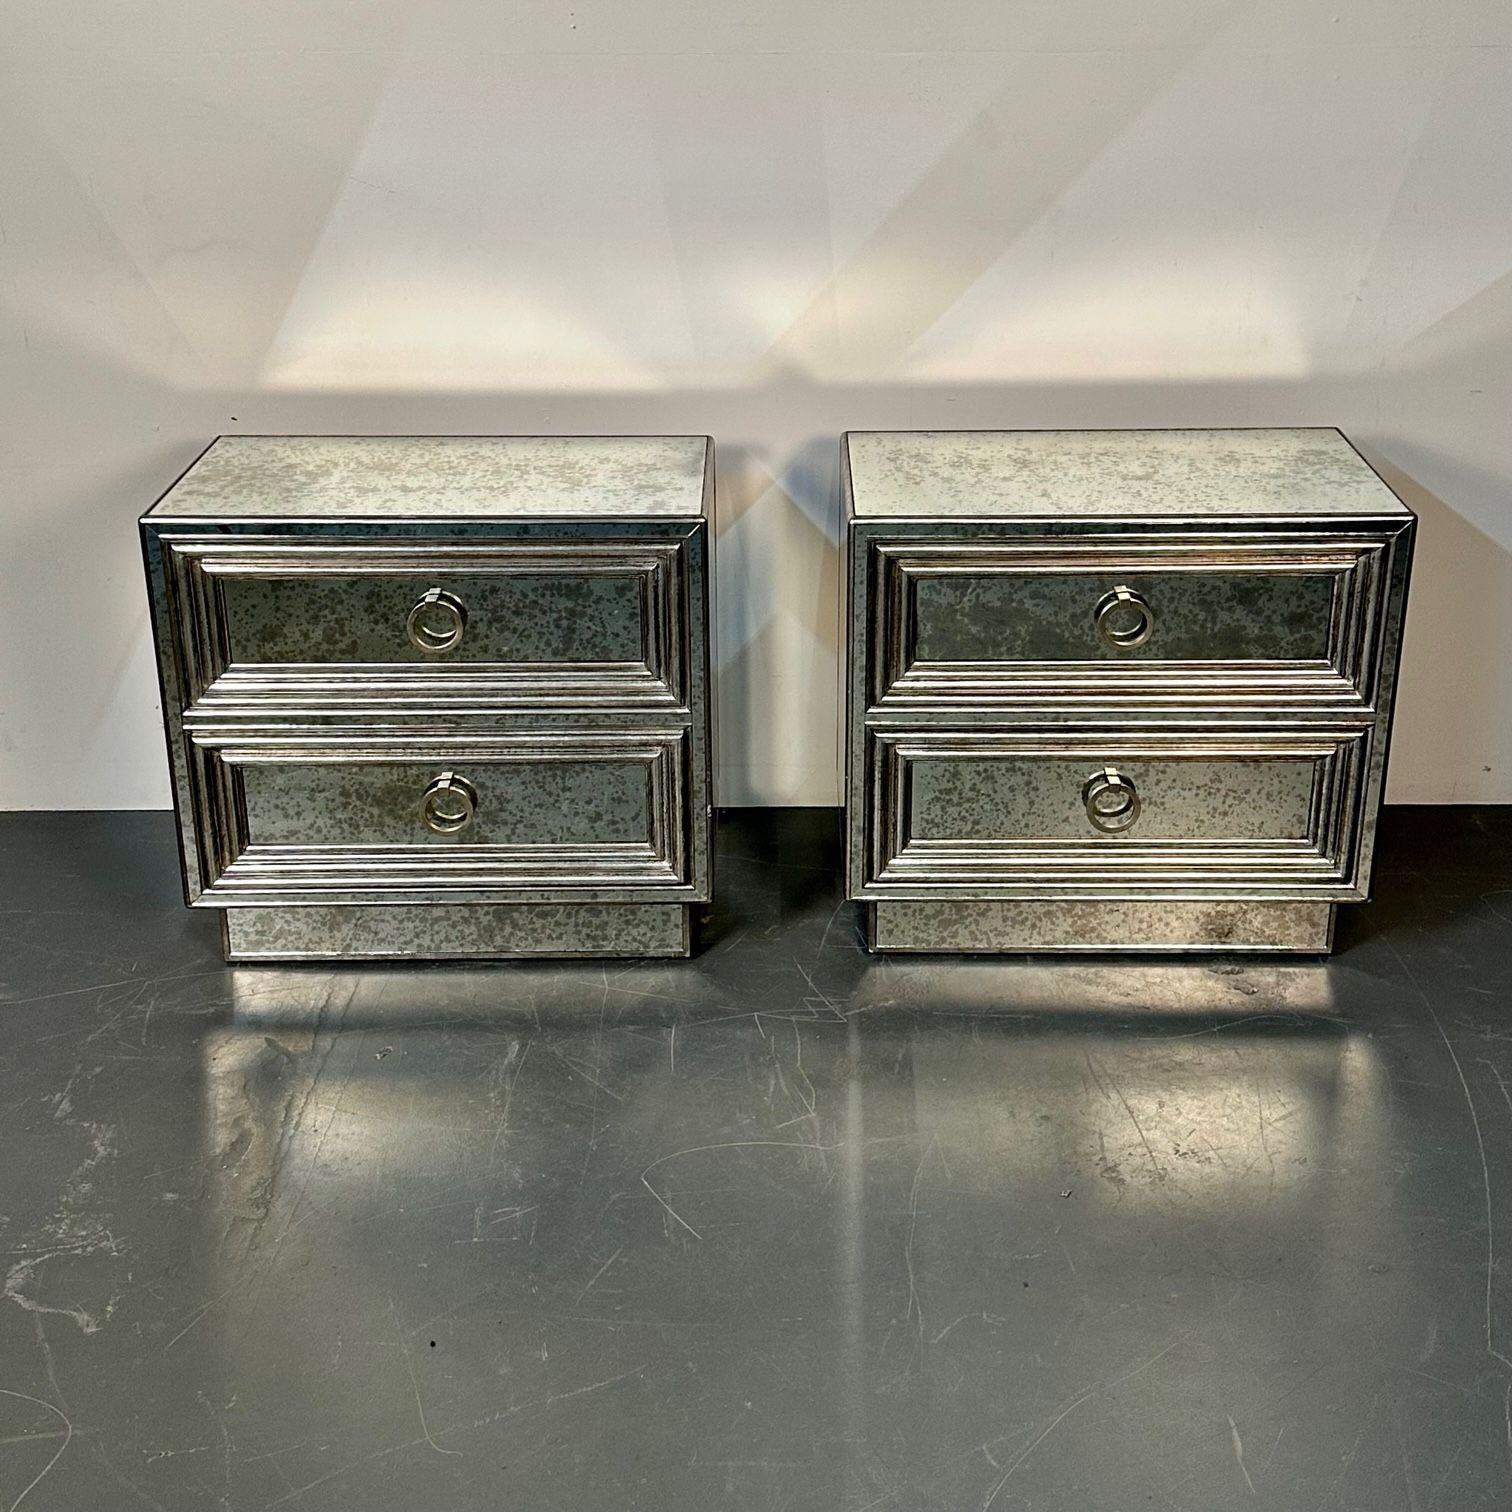 Pair Mirrored Hollywood Regency Nightstands, end tables, side tables, distressed
A stunning pair of two drawer antiqued mirror night or bedside stands. Each fine custom quality table having silver giltwood cases with two drawers having matching